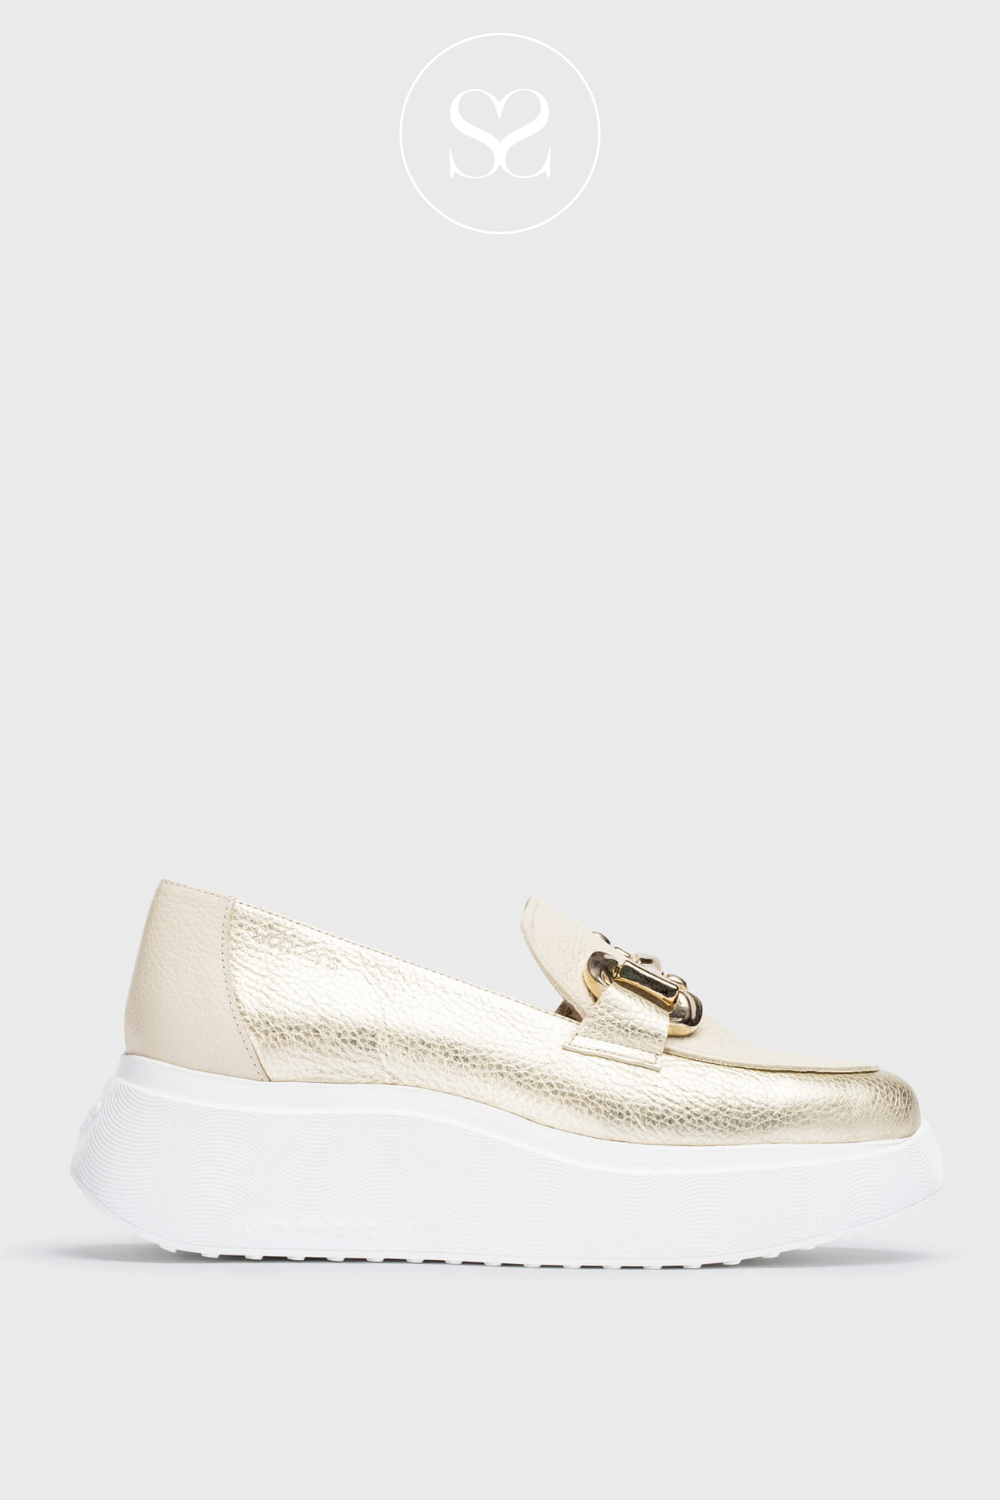 WONDERS A-3604 GOLD LEATHER WEDGE SHOE WITH WHITE SOLE AND GOLD BUCKLE